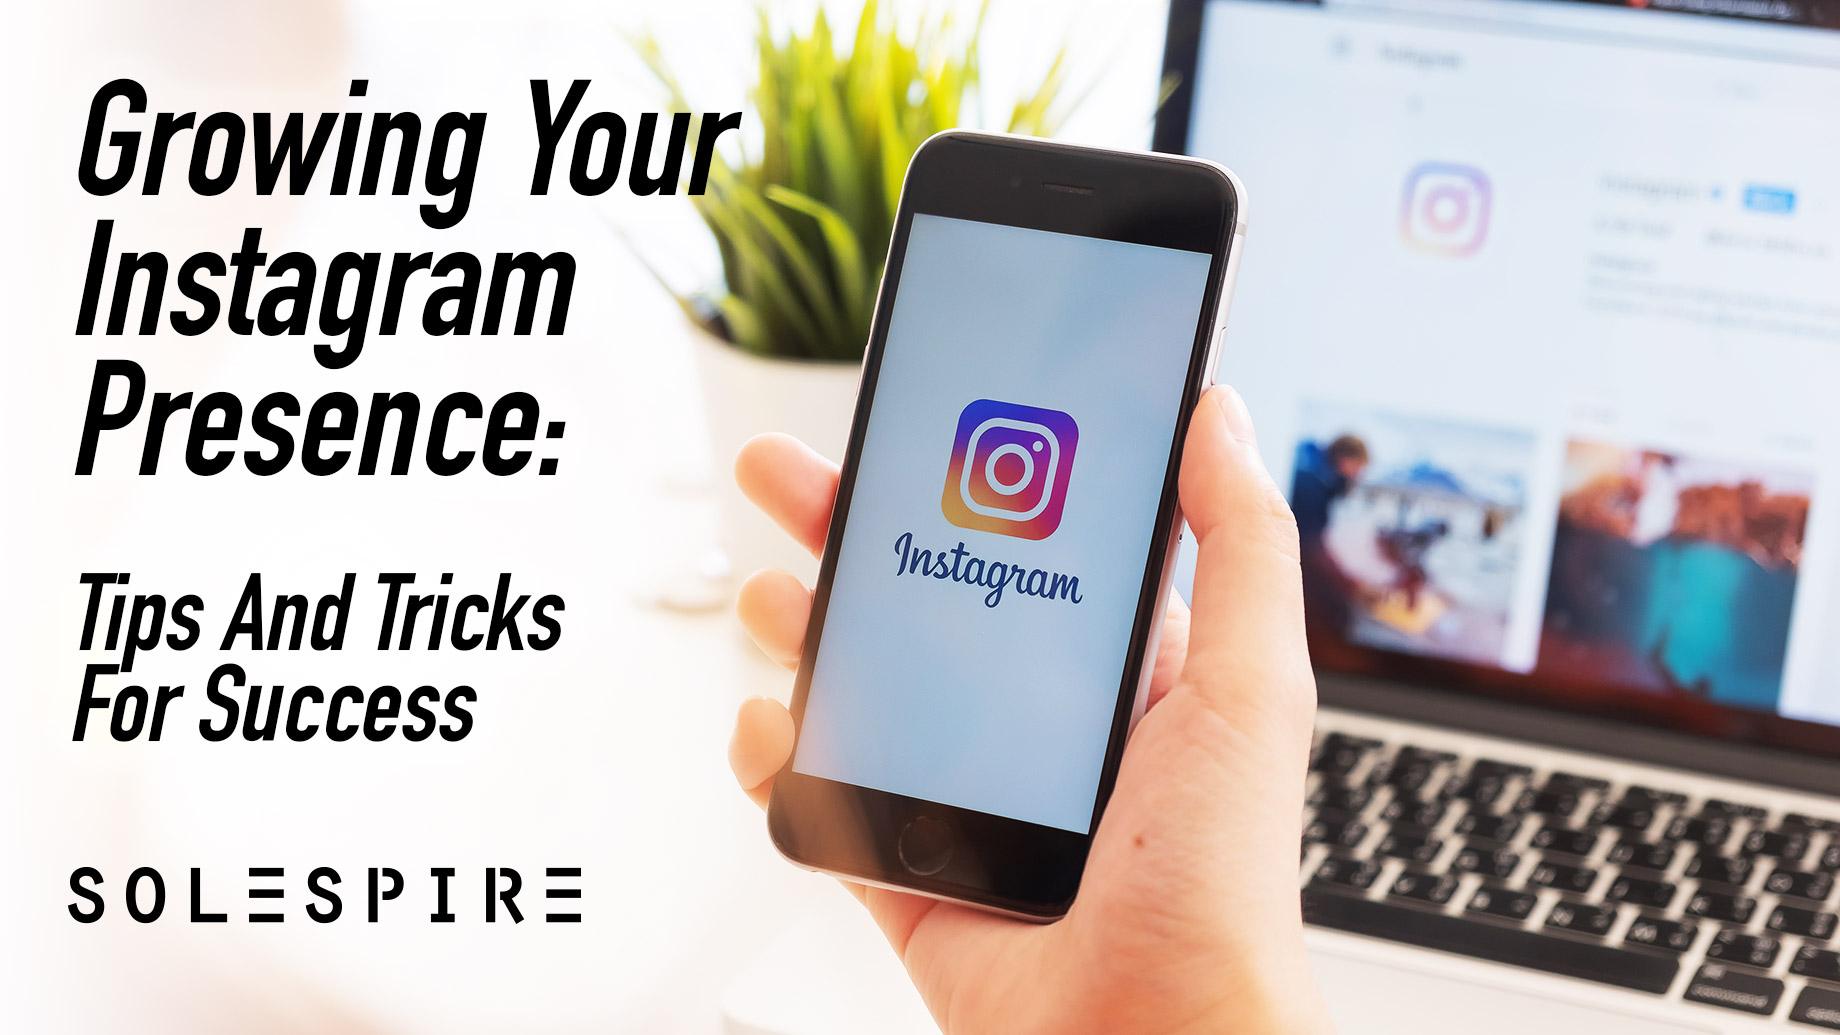 Growing Your Instagram Presence: Tips And Tricks For Success